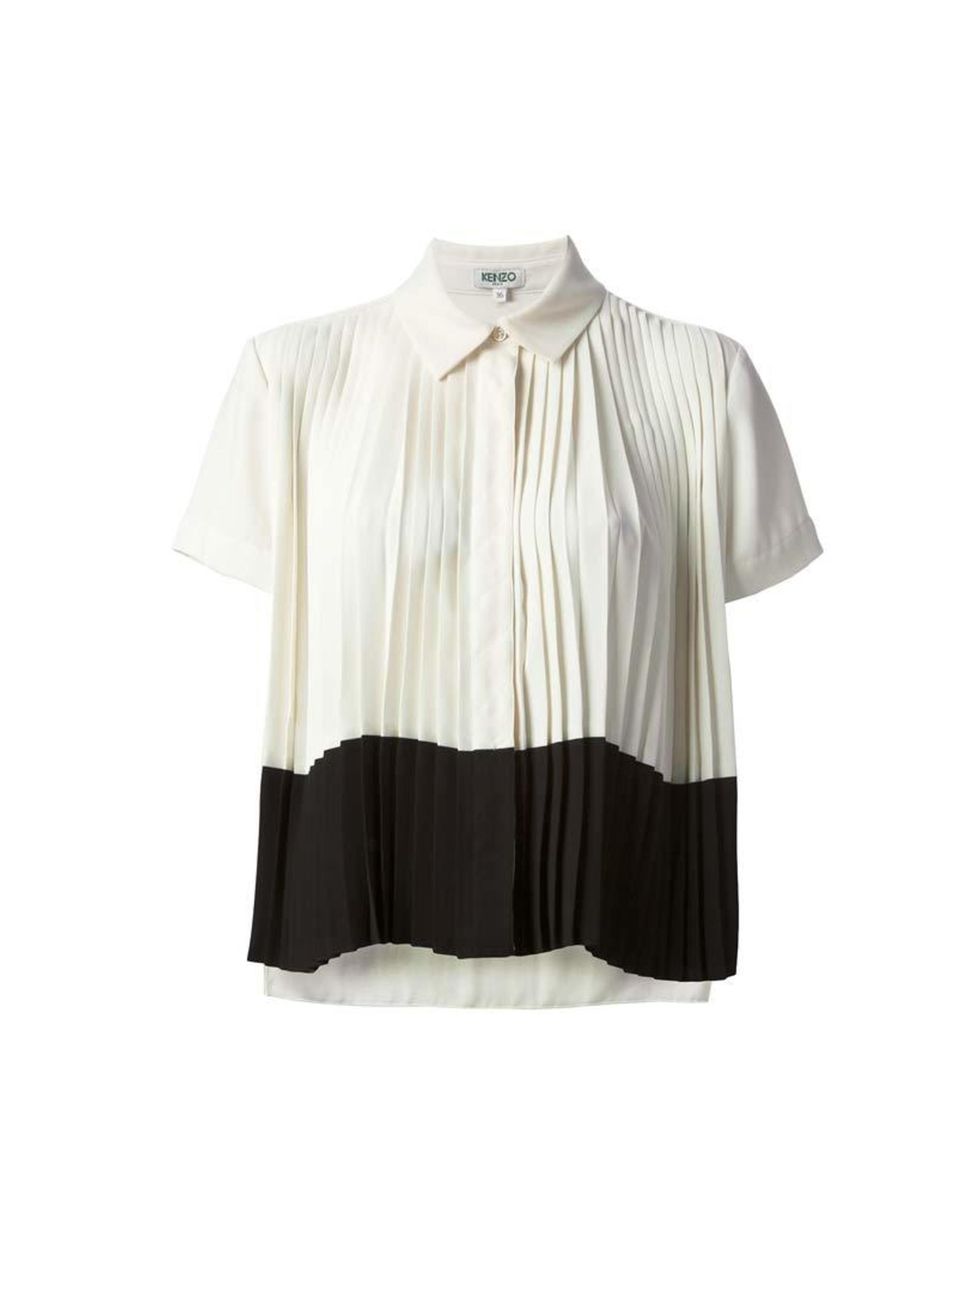 <p>..or a a monochrome shirt for the evening</p><p>Kenzo, £263 available at <a href="http://www.farfetch.com/shopping/women/salvatore-ferragamo-striped-bow-detail-t-shirt-item-10654871.aspx?storeid=9636">Farfecth</a></p>